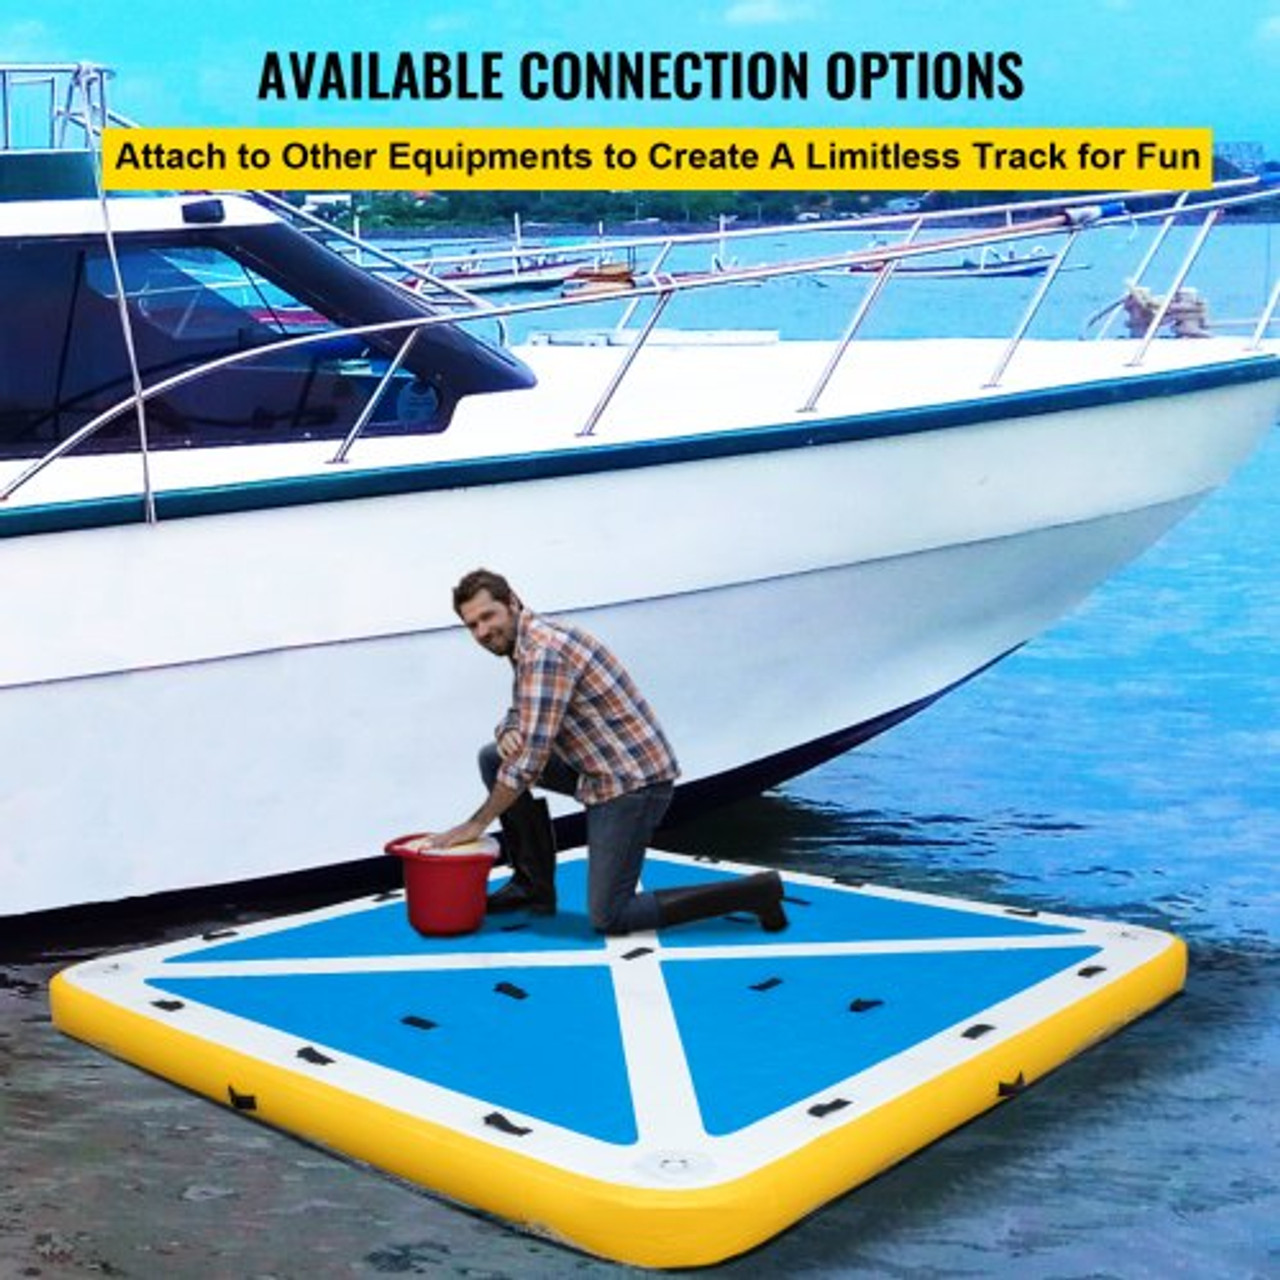 Inflatable Floating Dock, Inflatable Dock Platform with Electric Air Pump, Inflatable Swim Platform 6 Inch Thick, Floating Dock 4-6 People, Floating Platform for Pool Beach Ocean (8 x 6 ft)